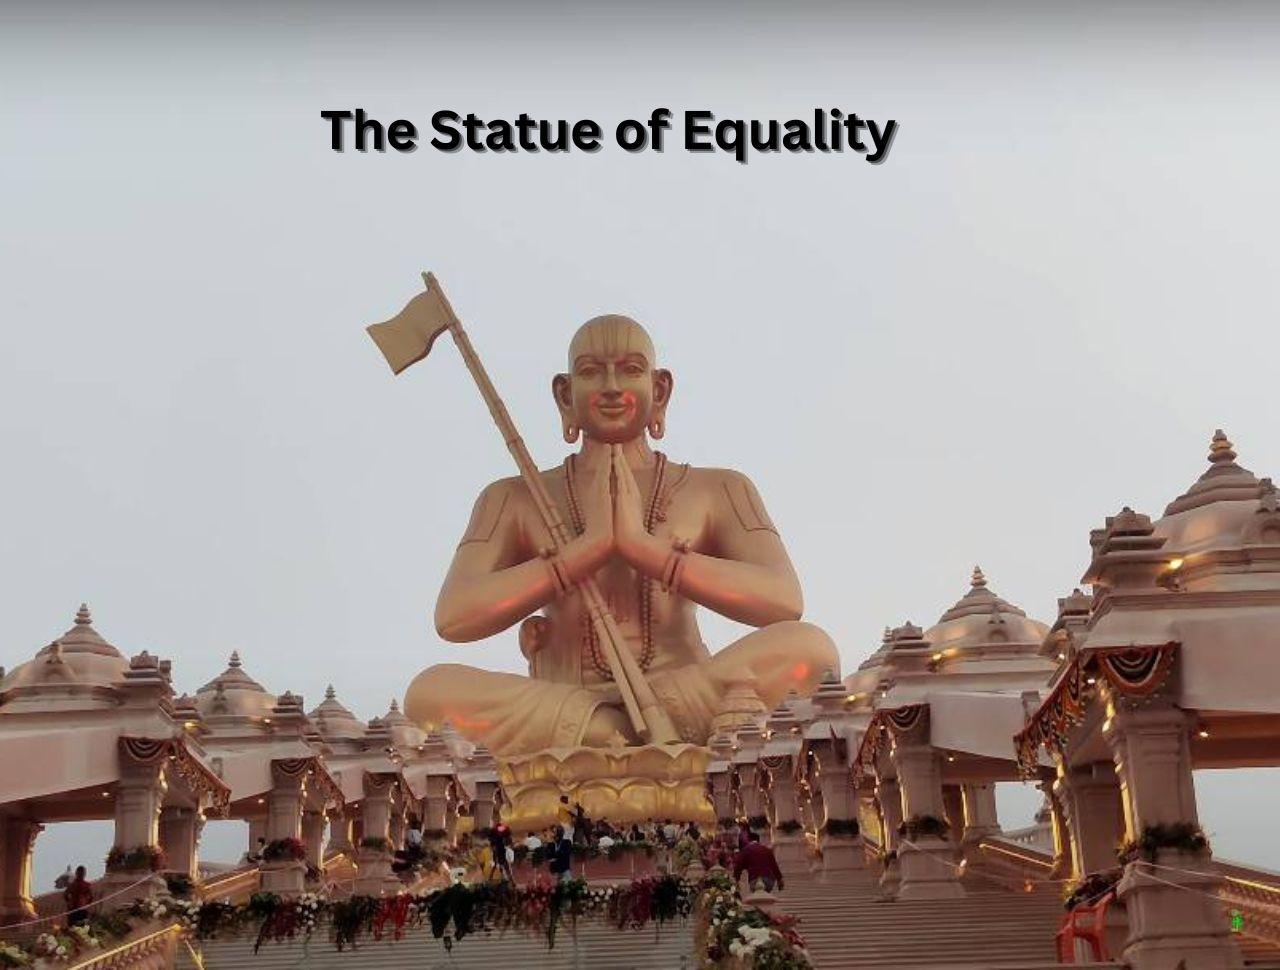 The Statue of Equality: Opening Hours and Tickets, Distances from Nearest Cities, and More